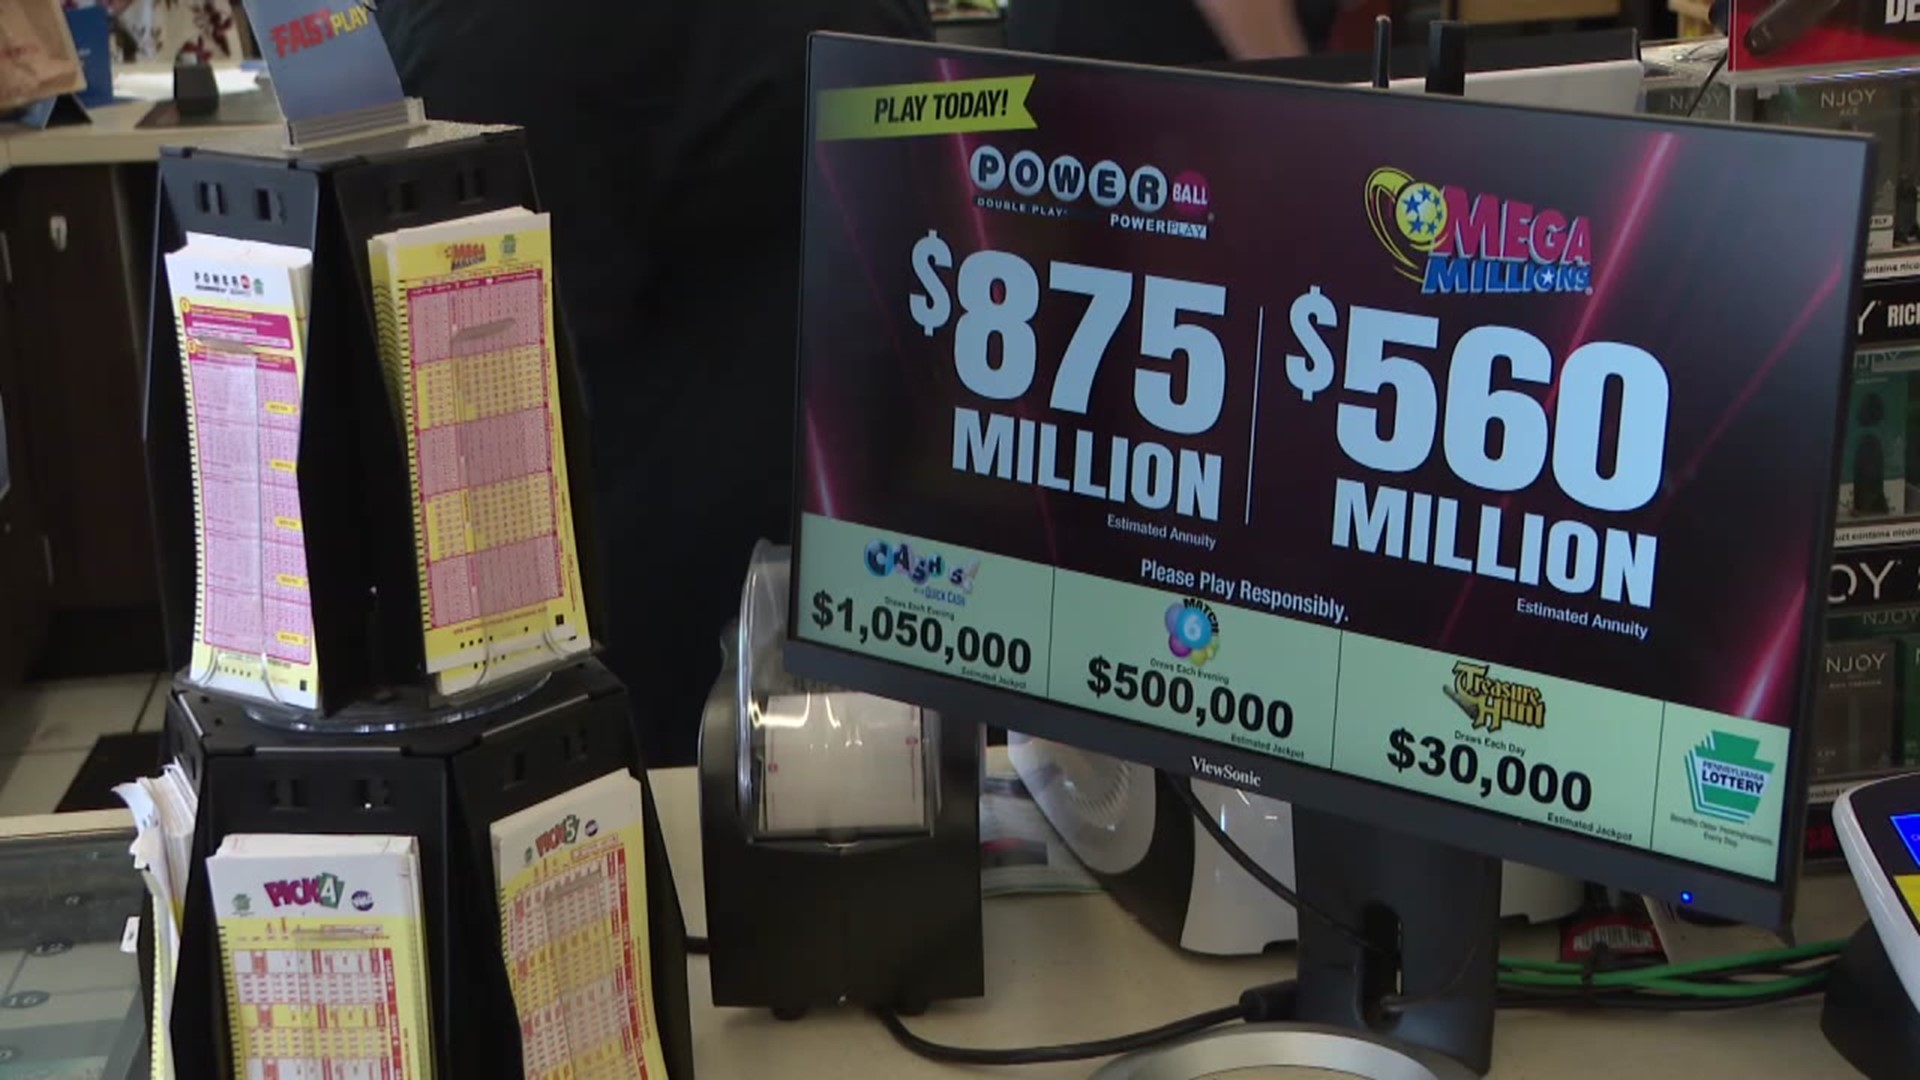 With Powerball being at $875 million and Mega Millions at $560 million, there is plenty of money to win.